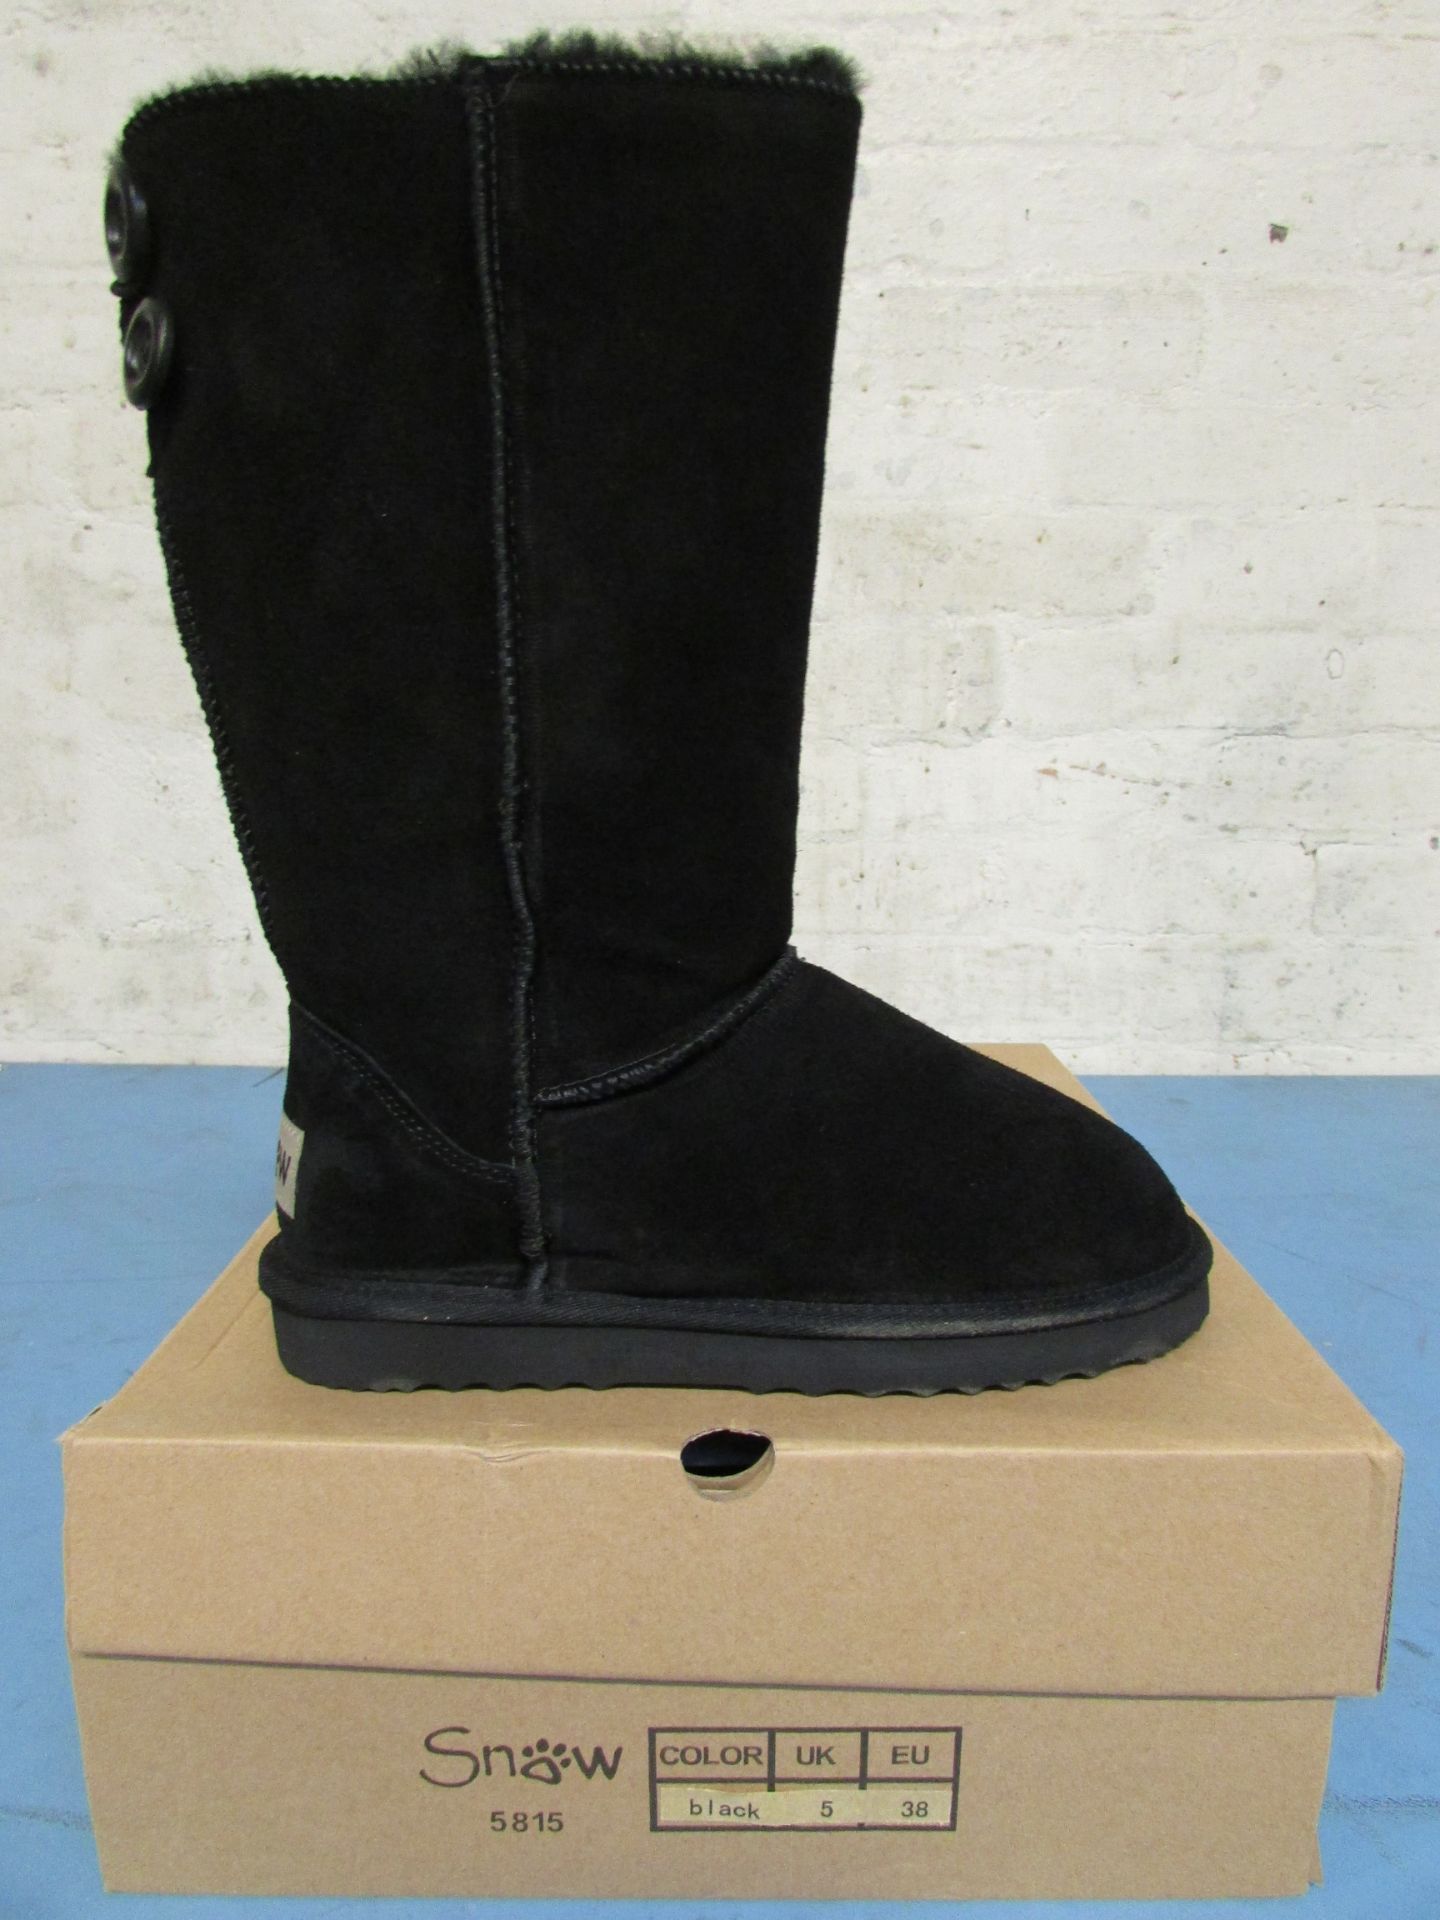 SNOW PAW BOOT IN BLACK UK SIZE 5